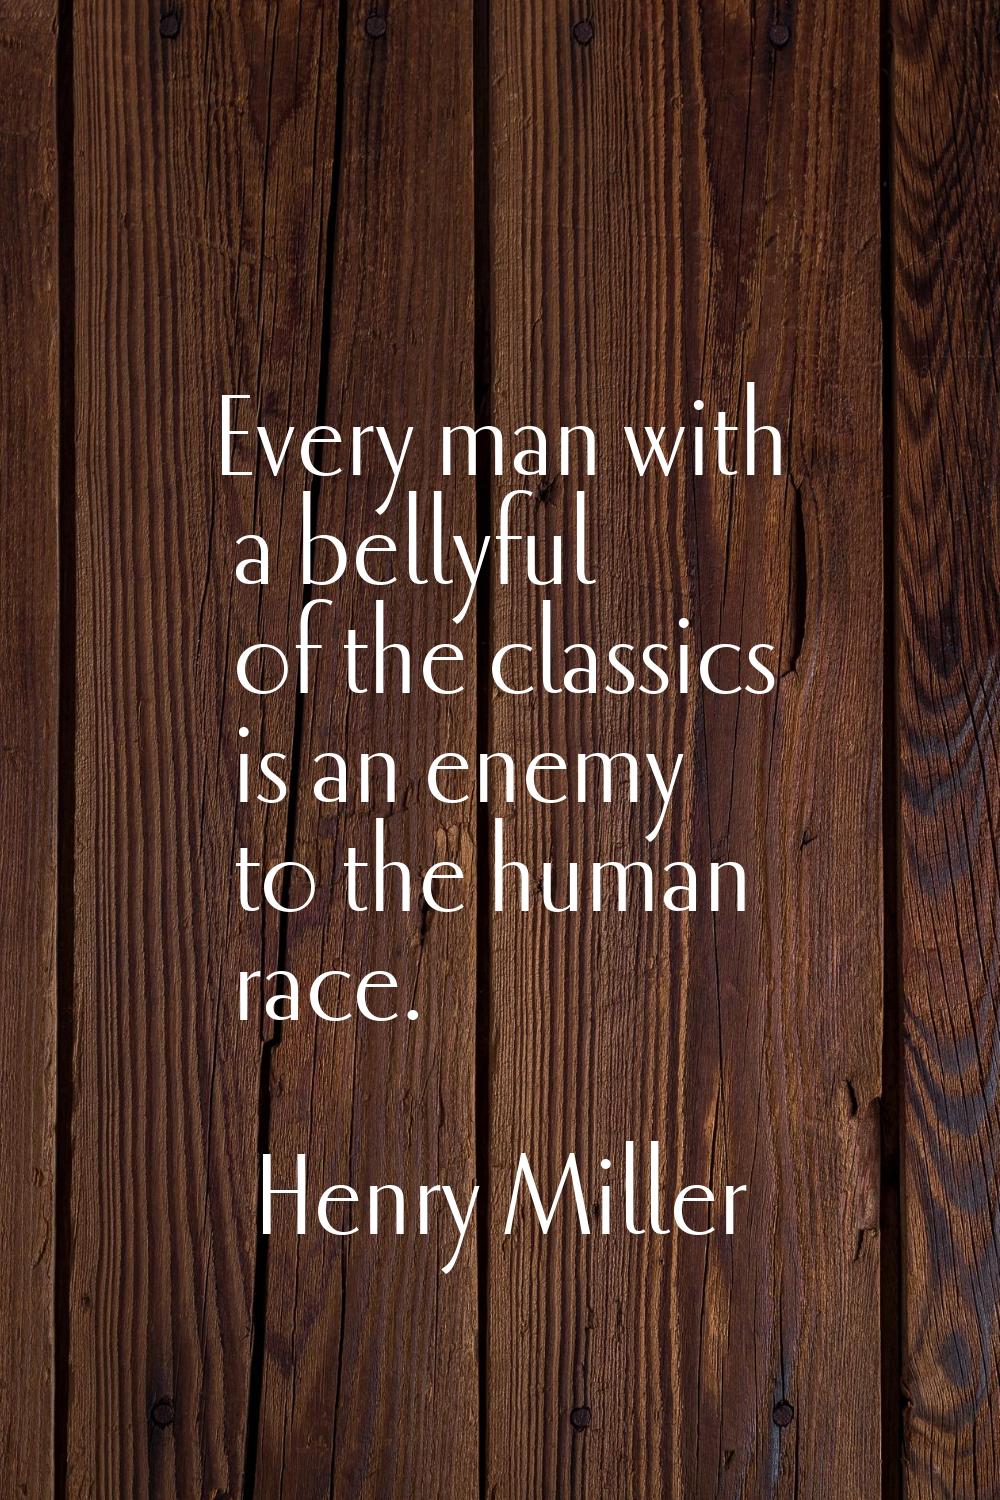 Every man with a bellyful of the classics is an enemy to the human race.